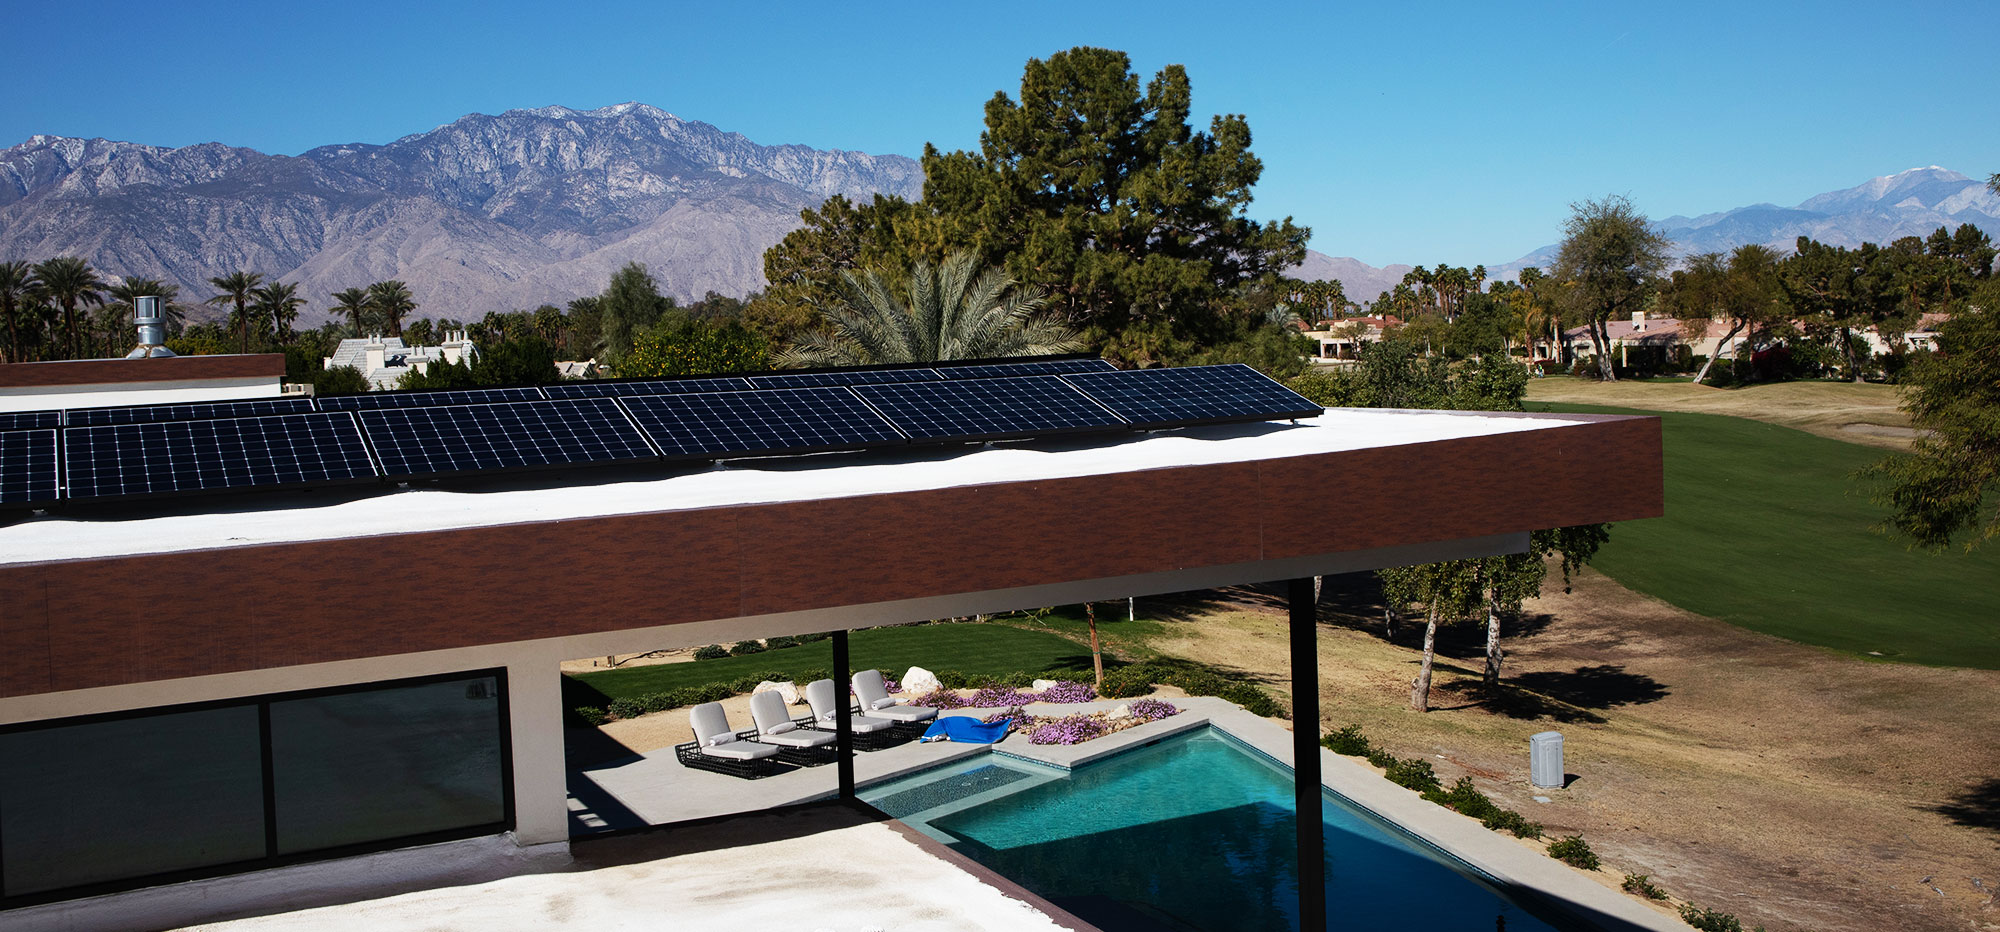 Solar Panels For Heating Up A Swimming Pool